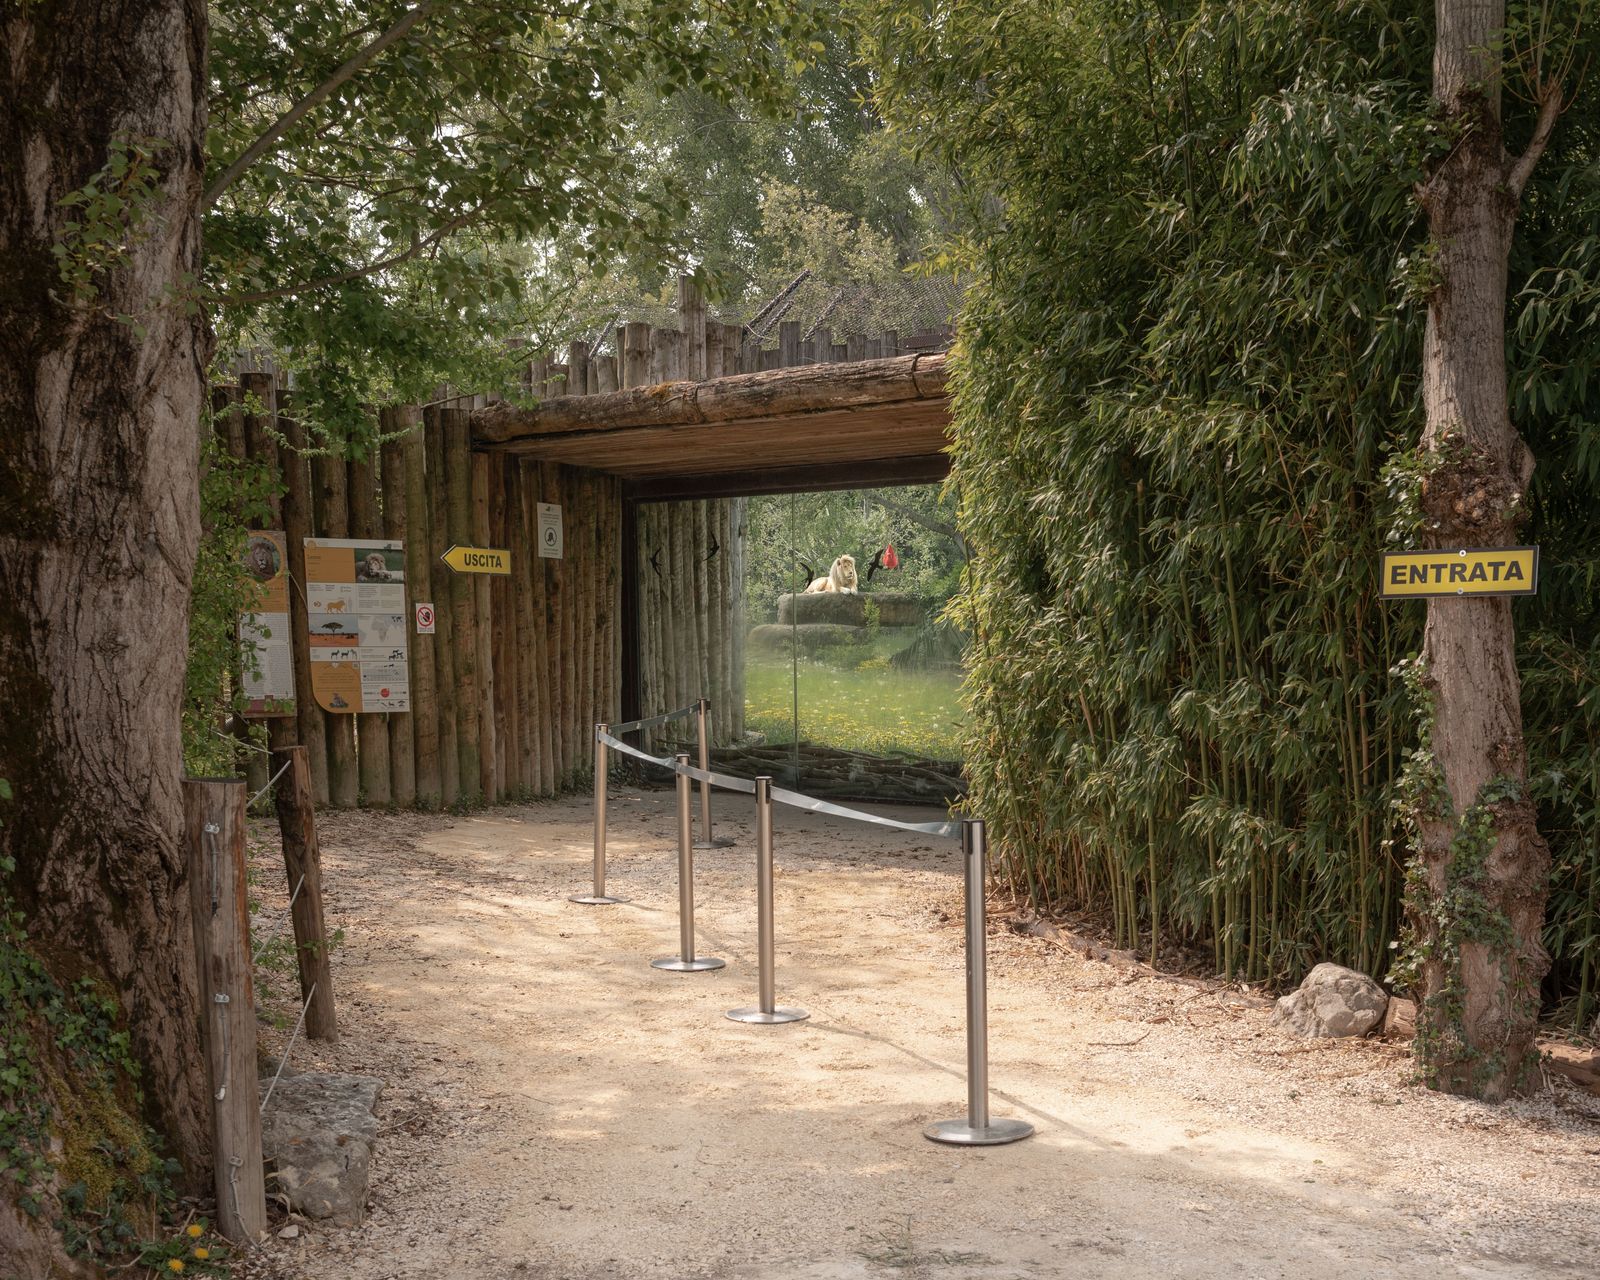 © Annalaura Cattelan - 16 - One-way path created to prevent crowds in front of the white lion observatory. (Parco Natura Viva, Bussolengo, VR)